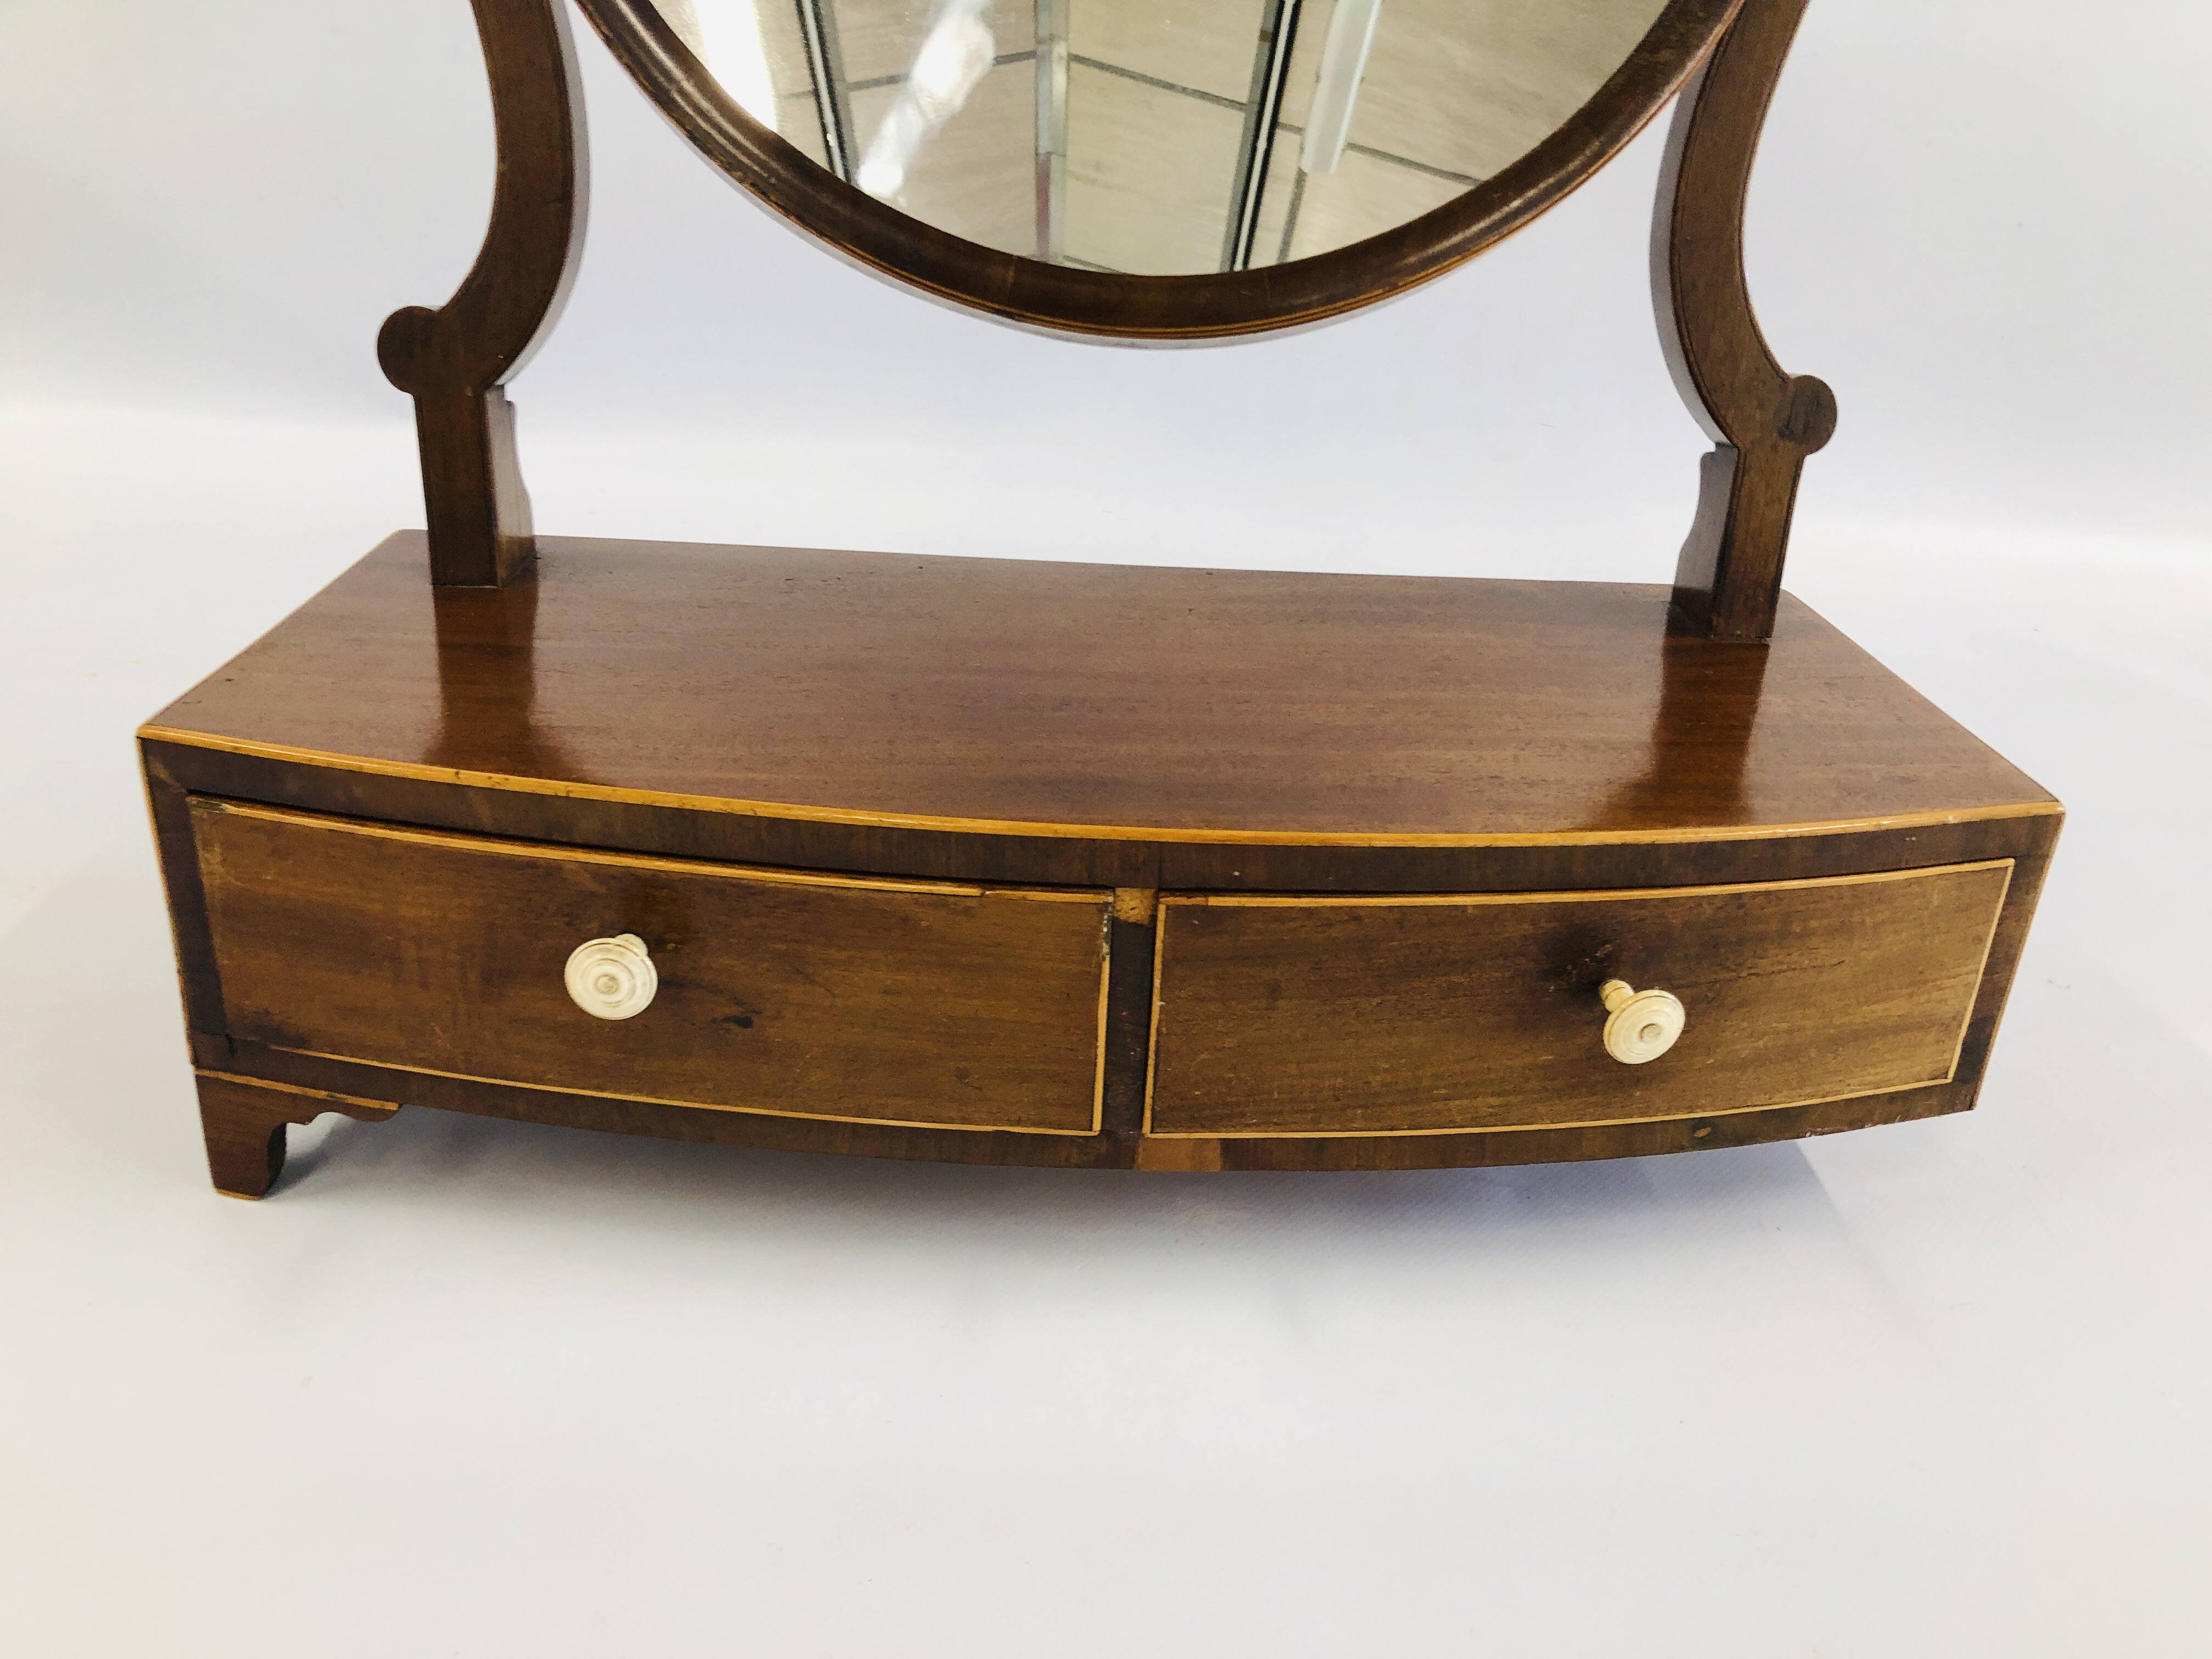 ANTIQUE DRESSING TABLE MIRROR. - Image 2 of 10